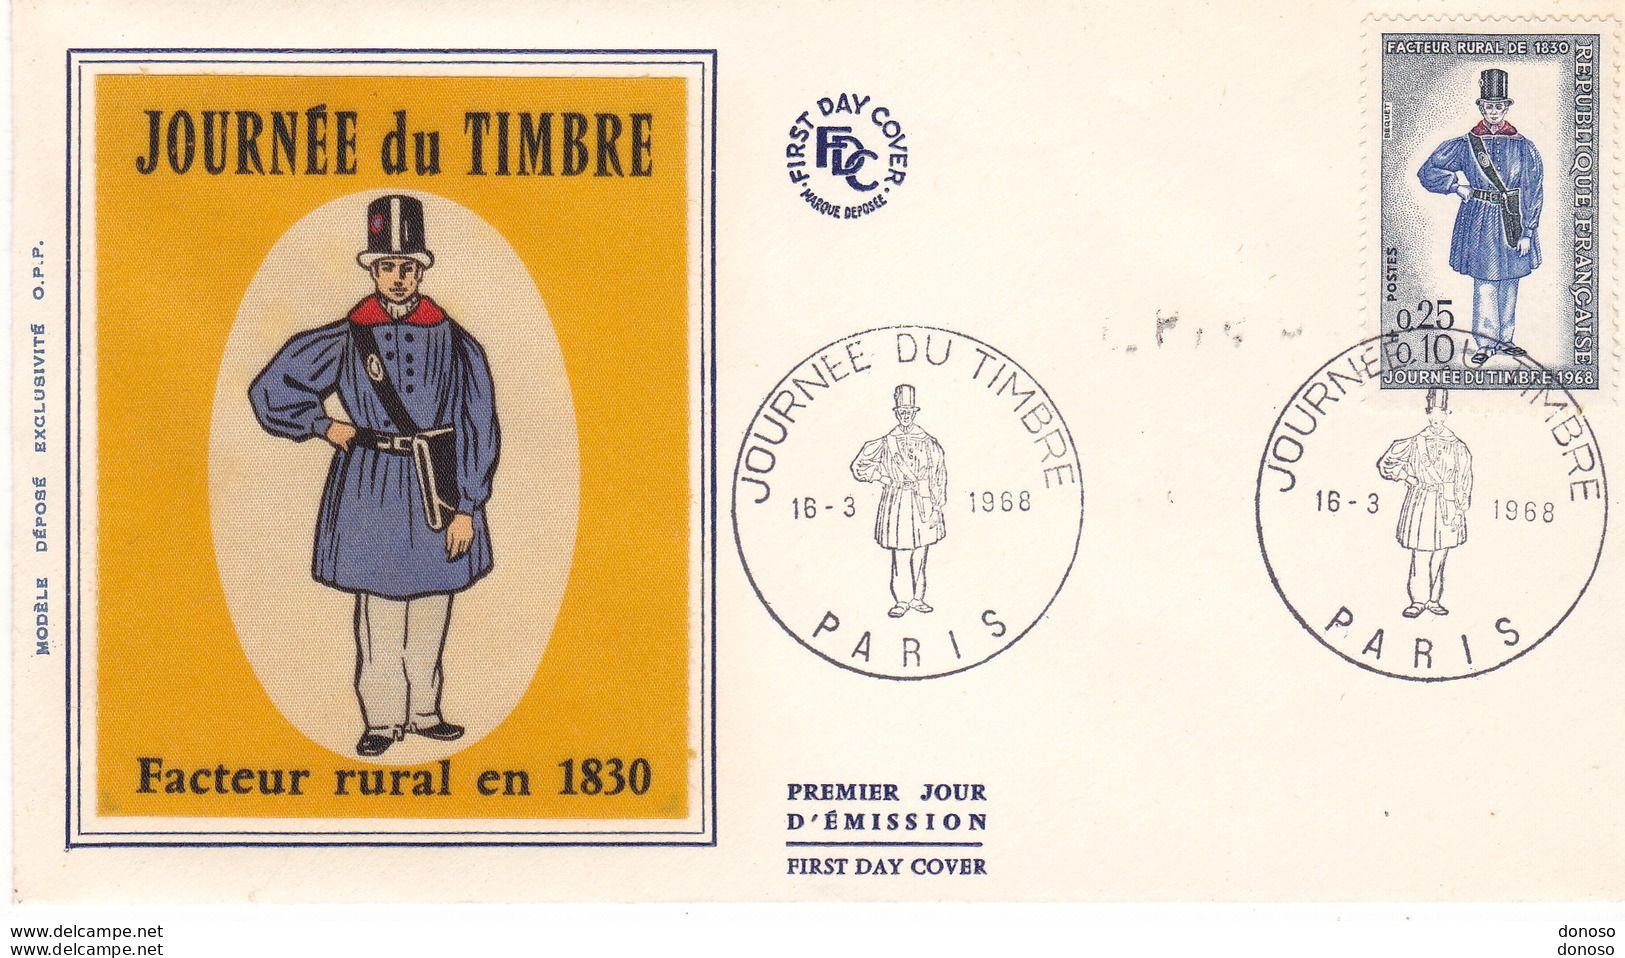 FRANCE 16/03 1968 FDC JOURNEE DU TIMBRE Yvert 1549 - Stamp's Day